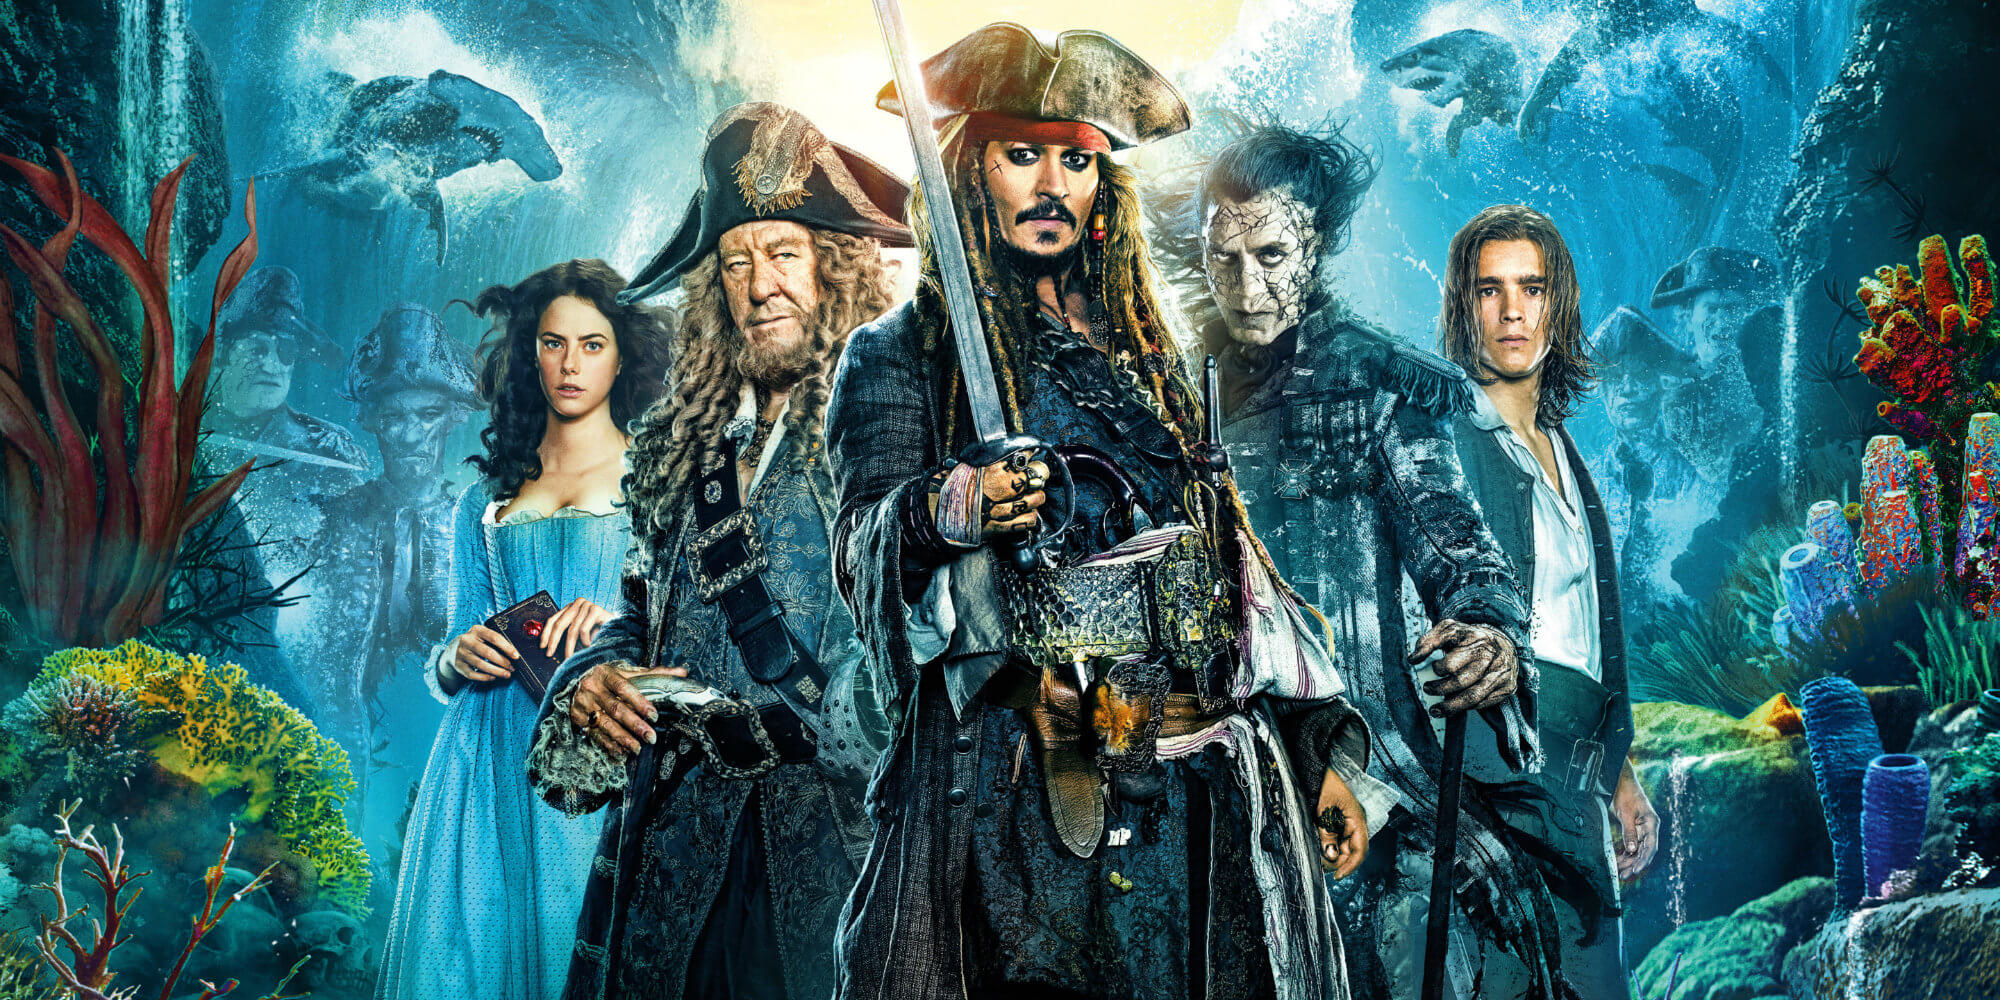 Hackers Threaten to Leak PIRATES OF THE CARIBBEAN: DEAD MEN TELL NO TALES , Demand Ransom!